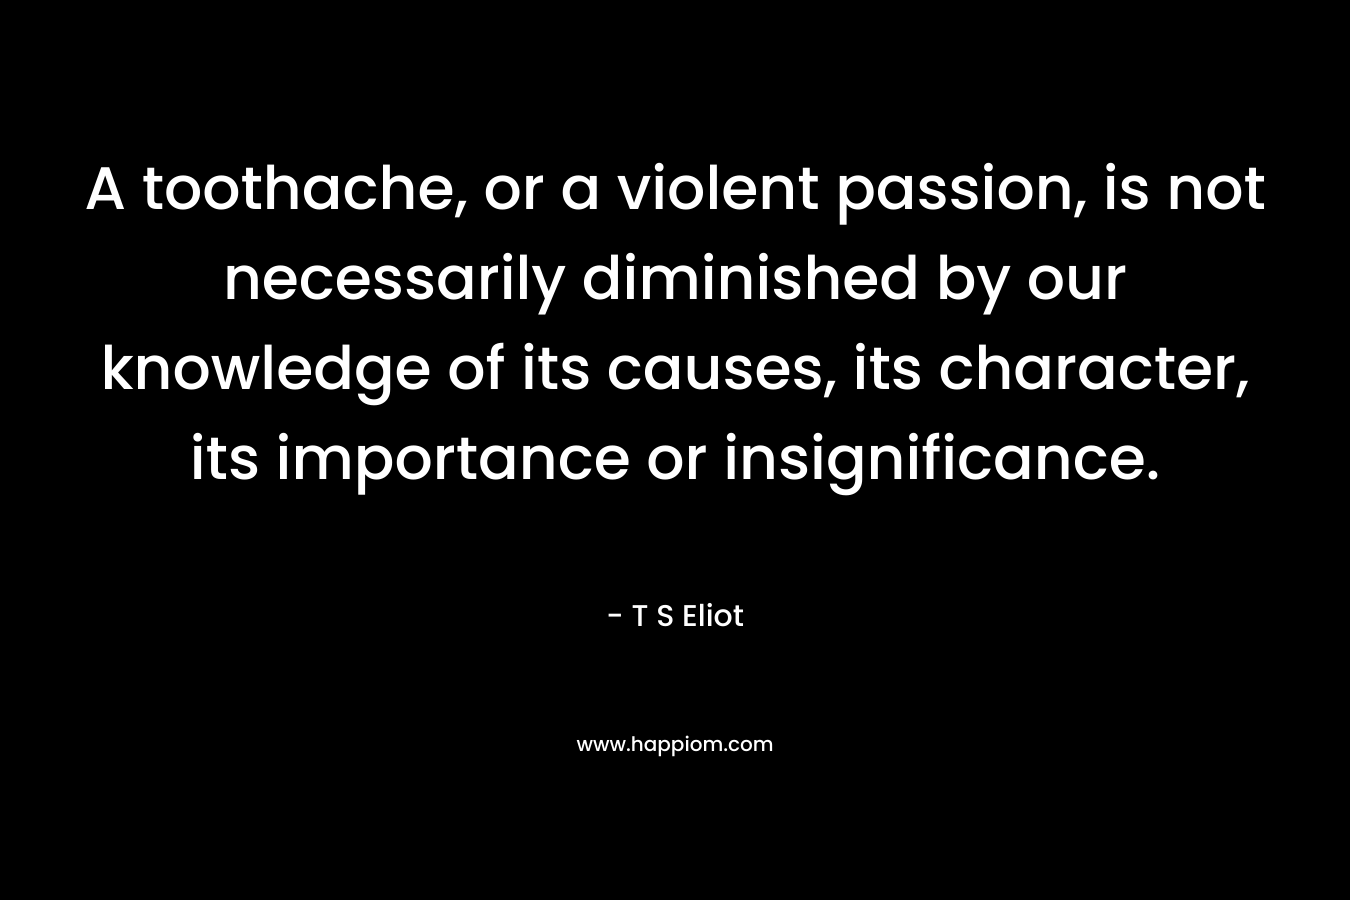 A toothache, or a violent passion, is not necessarily diminished by our knowledge of its causes, its character, its importance or insignificance.